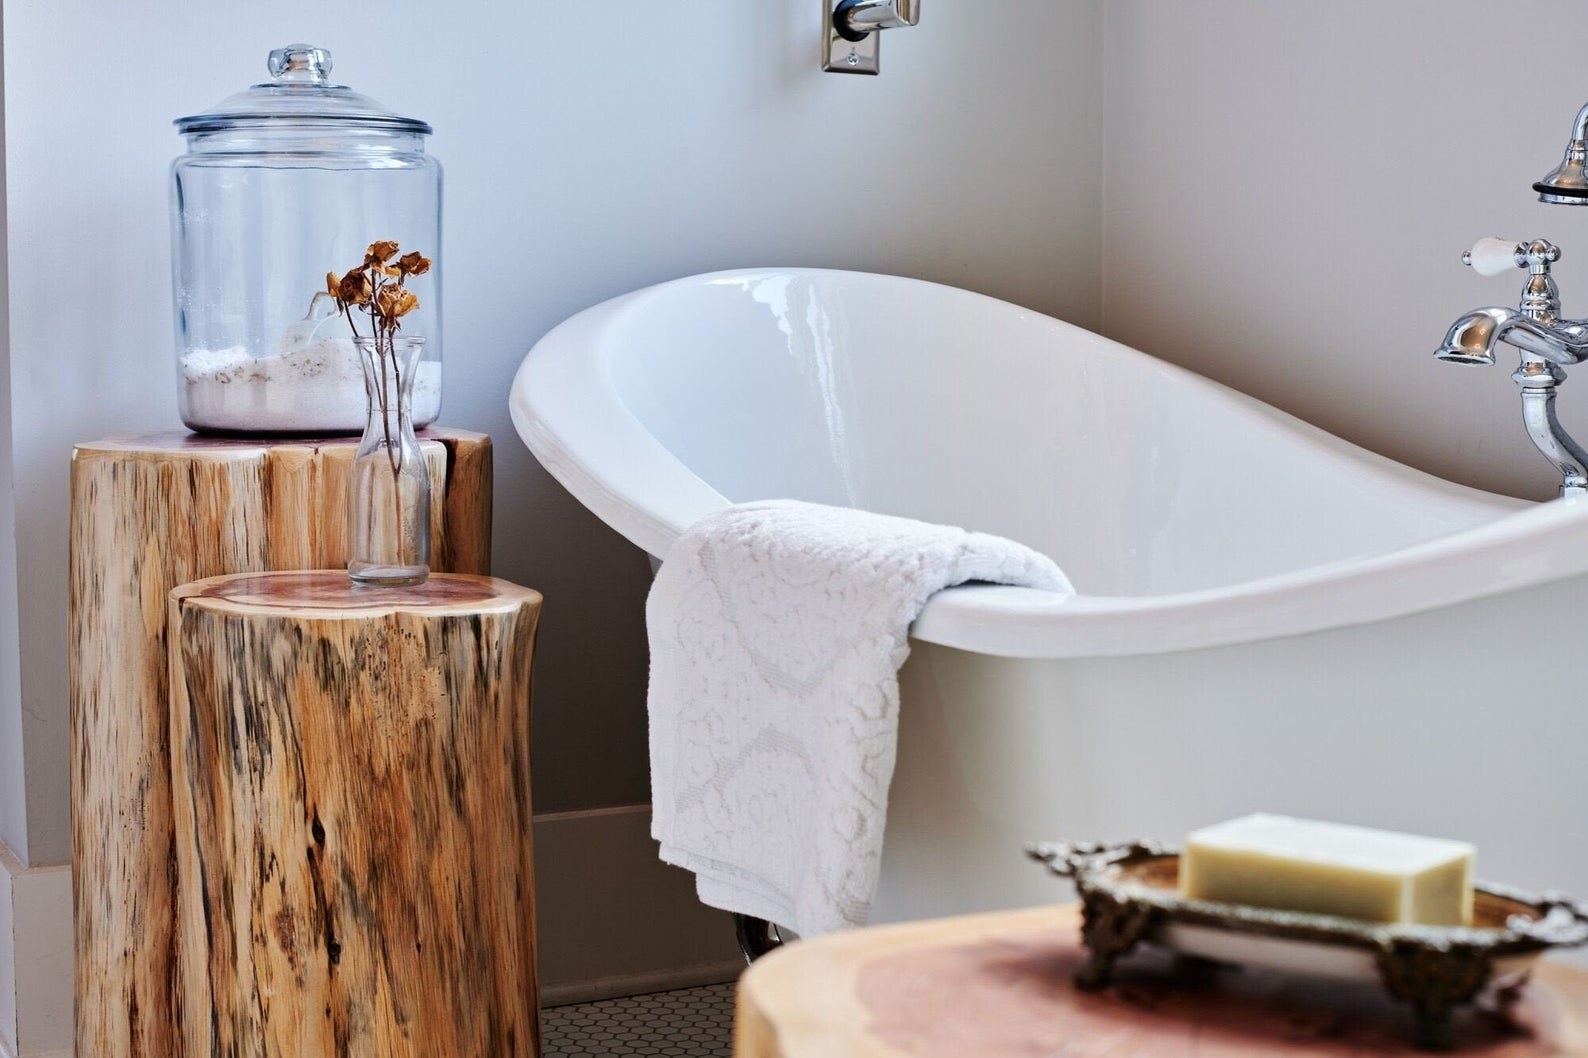 Wooden end tables in bathroom next to tub